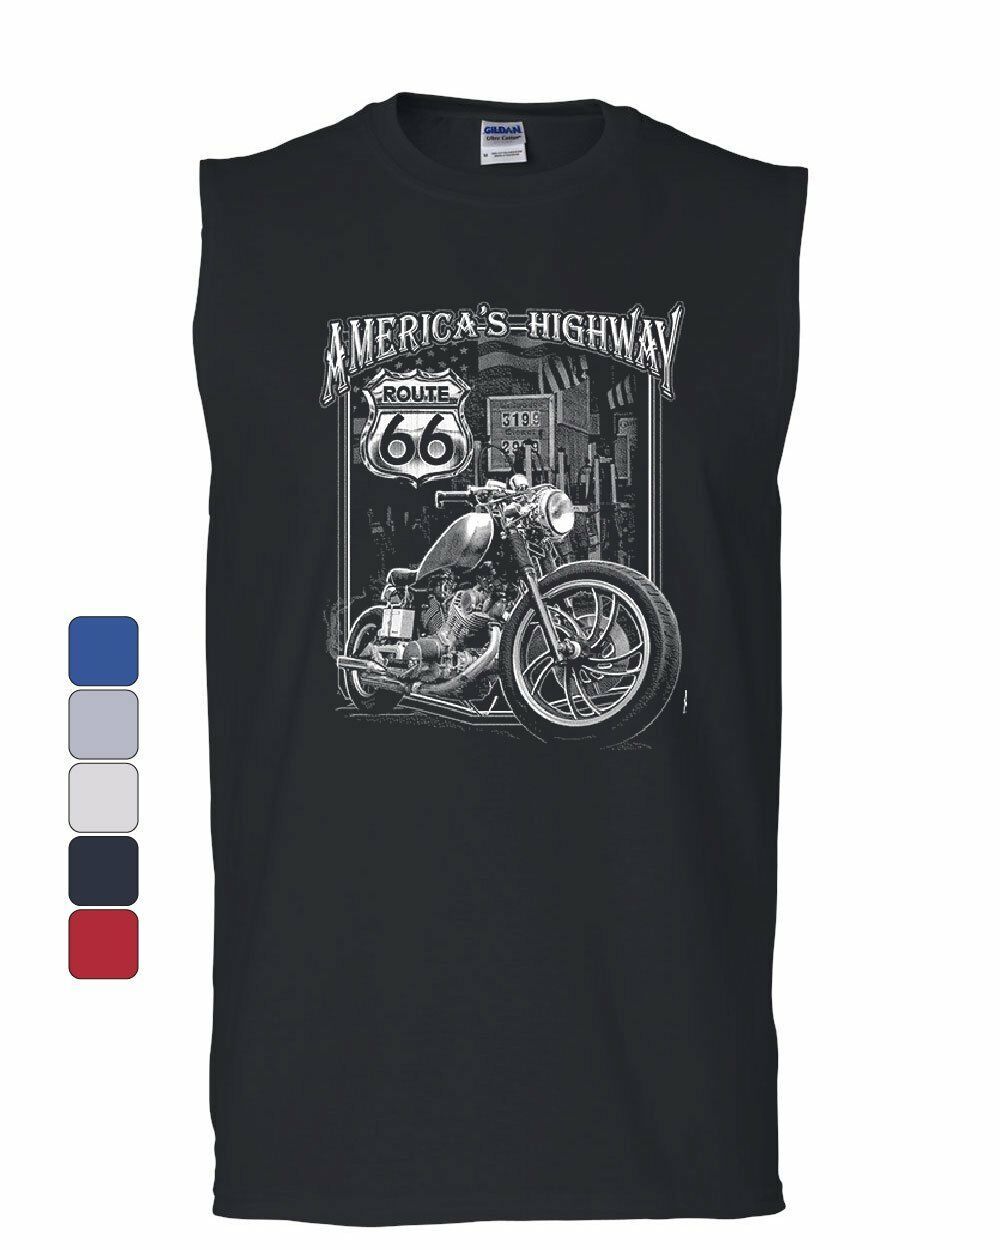 America's Highway Muscle Shirt Route 66 MC Motorcycle Chopper Bobber Sleeveless